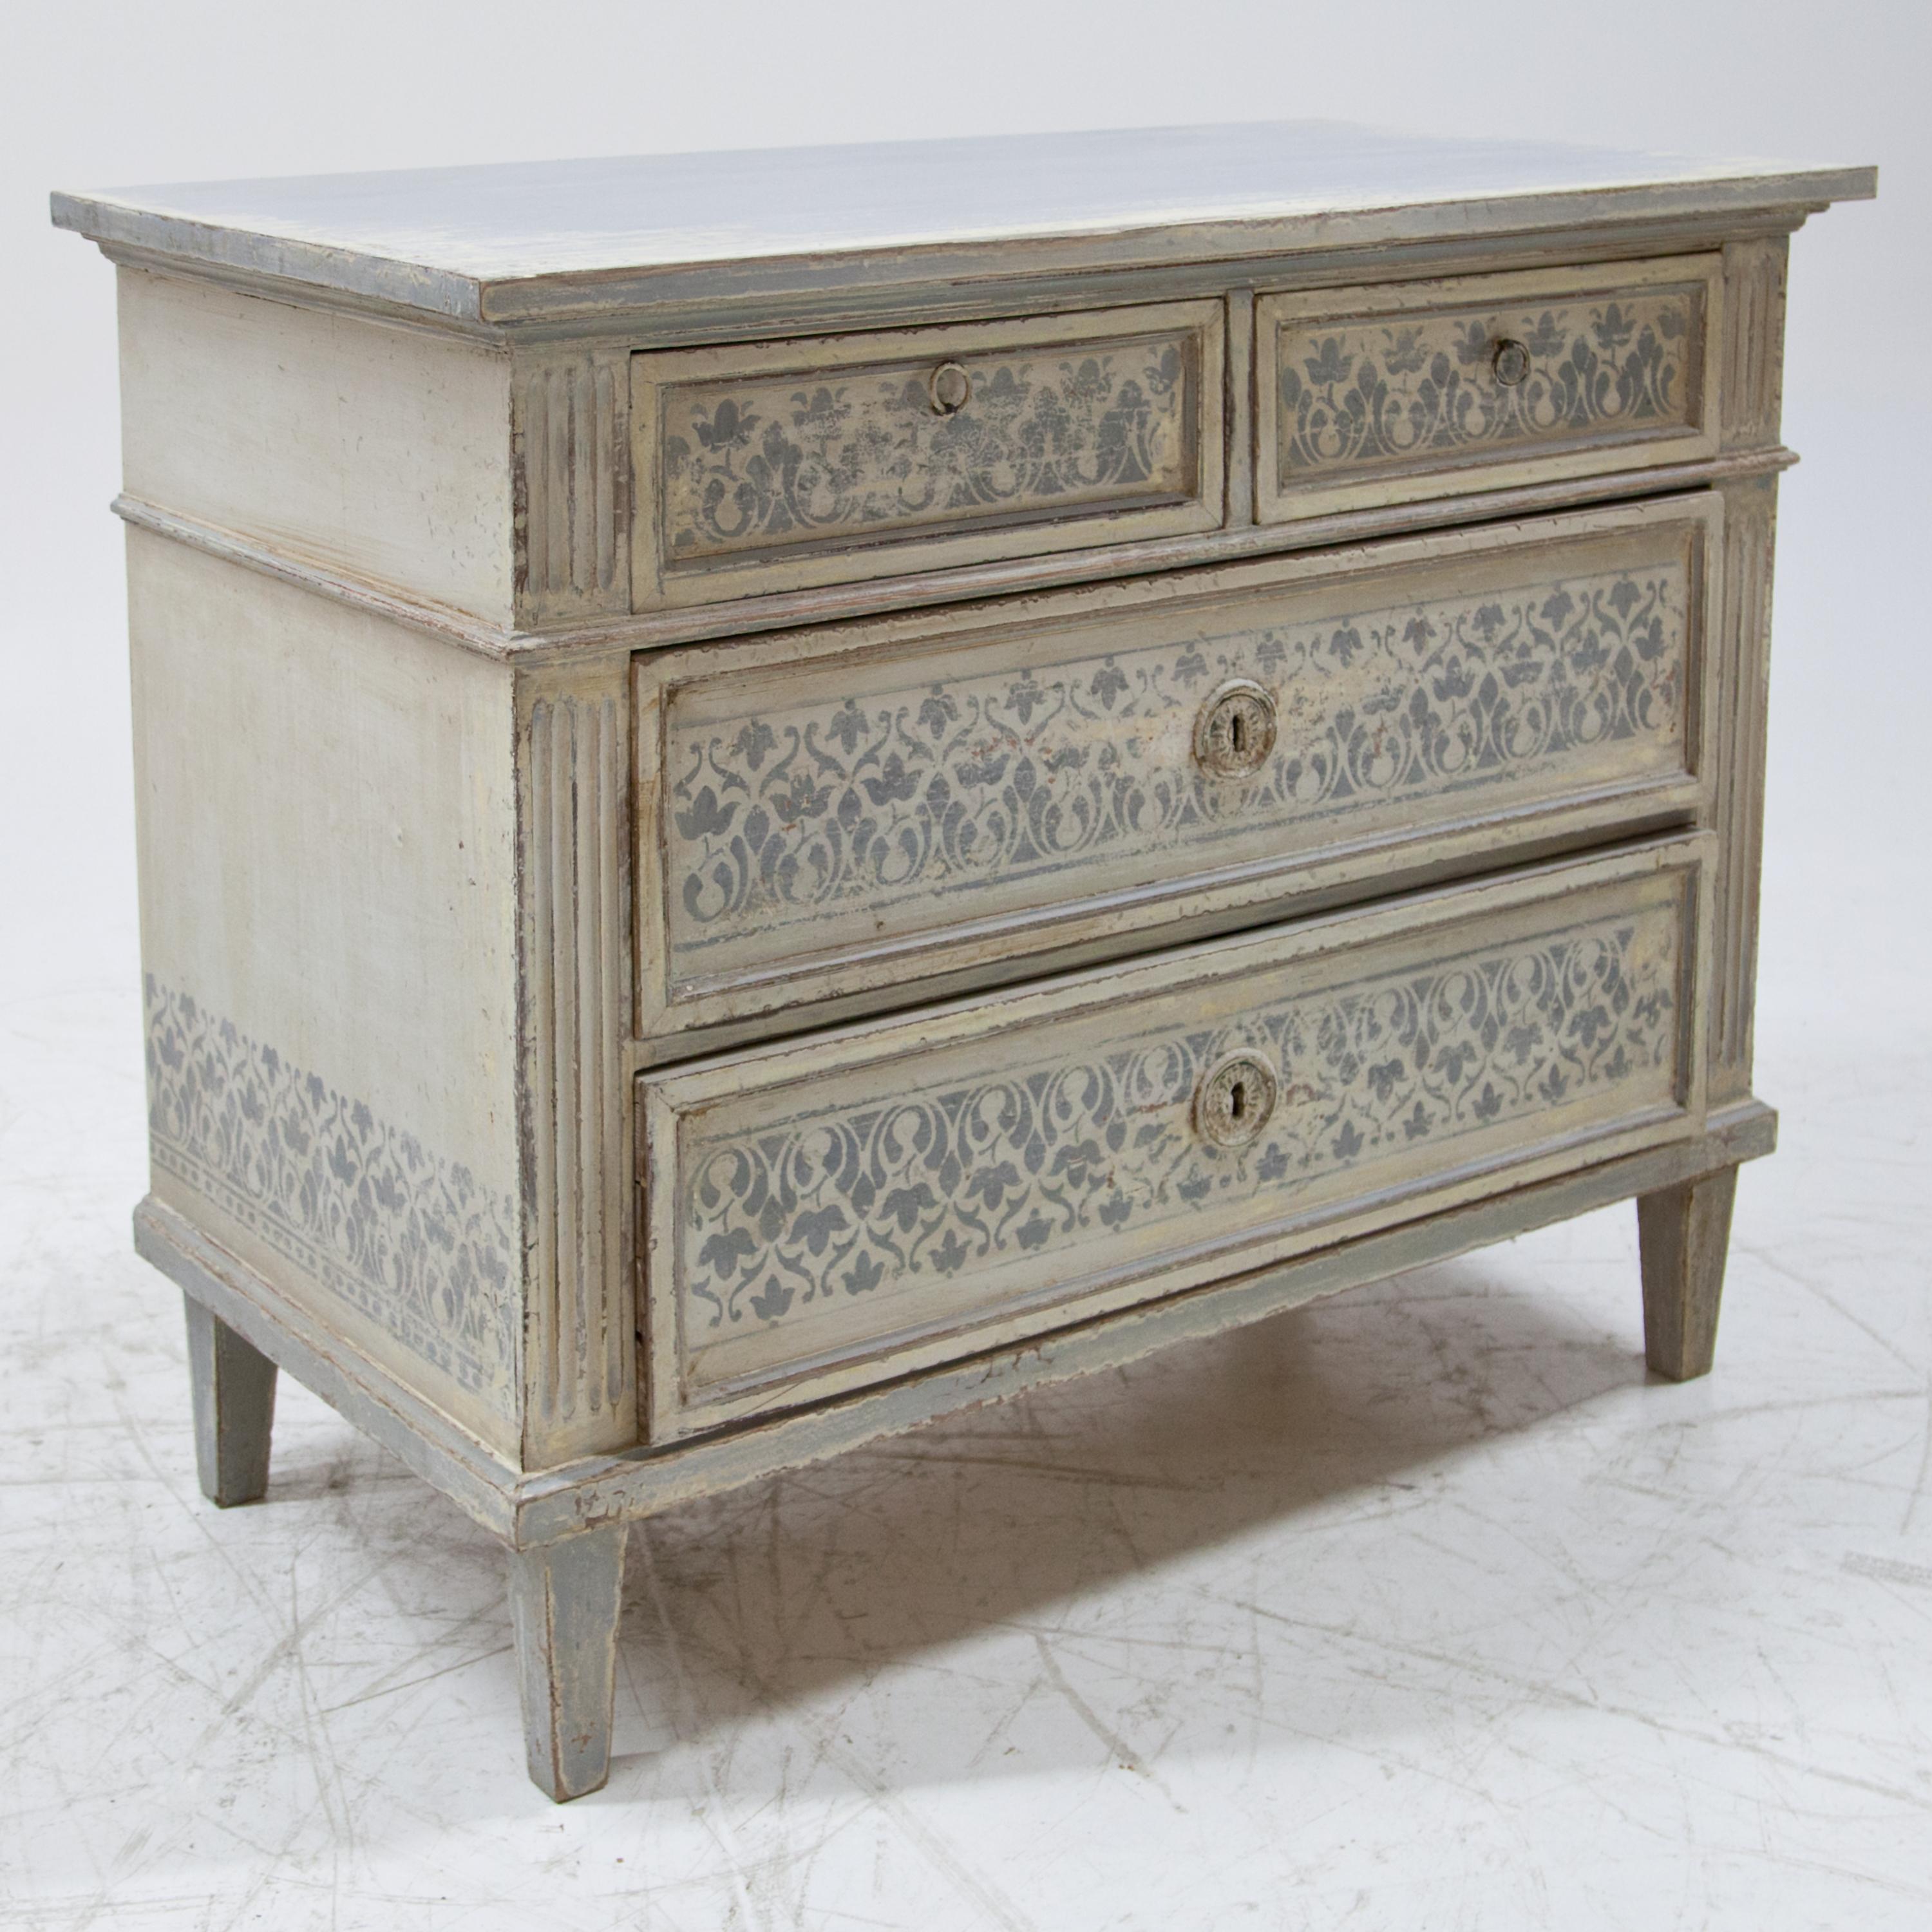 Chest of drawers in cream and light blue on square pointed feet with fluted corners and two large and two smaller drawers. The setting is new and decoratively rubbed through.